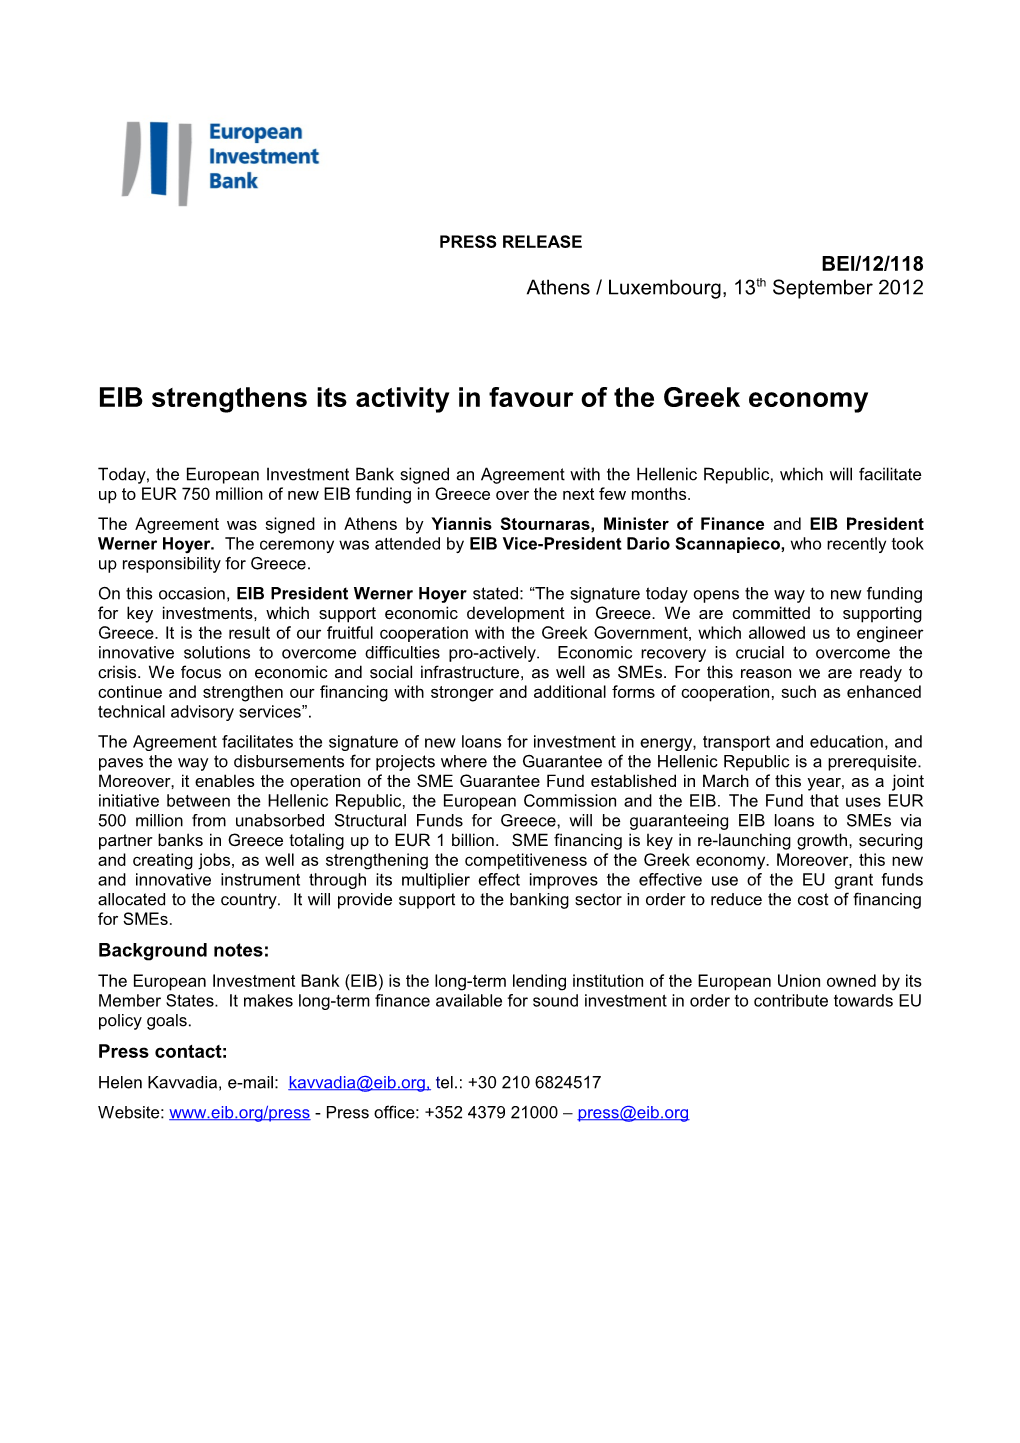 EIB Strengthens Its Activity in Favour of the Greek Economy